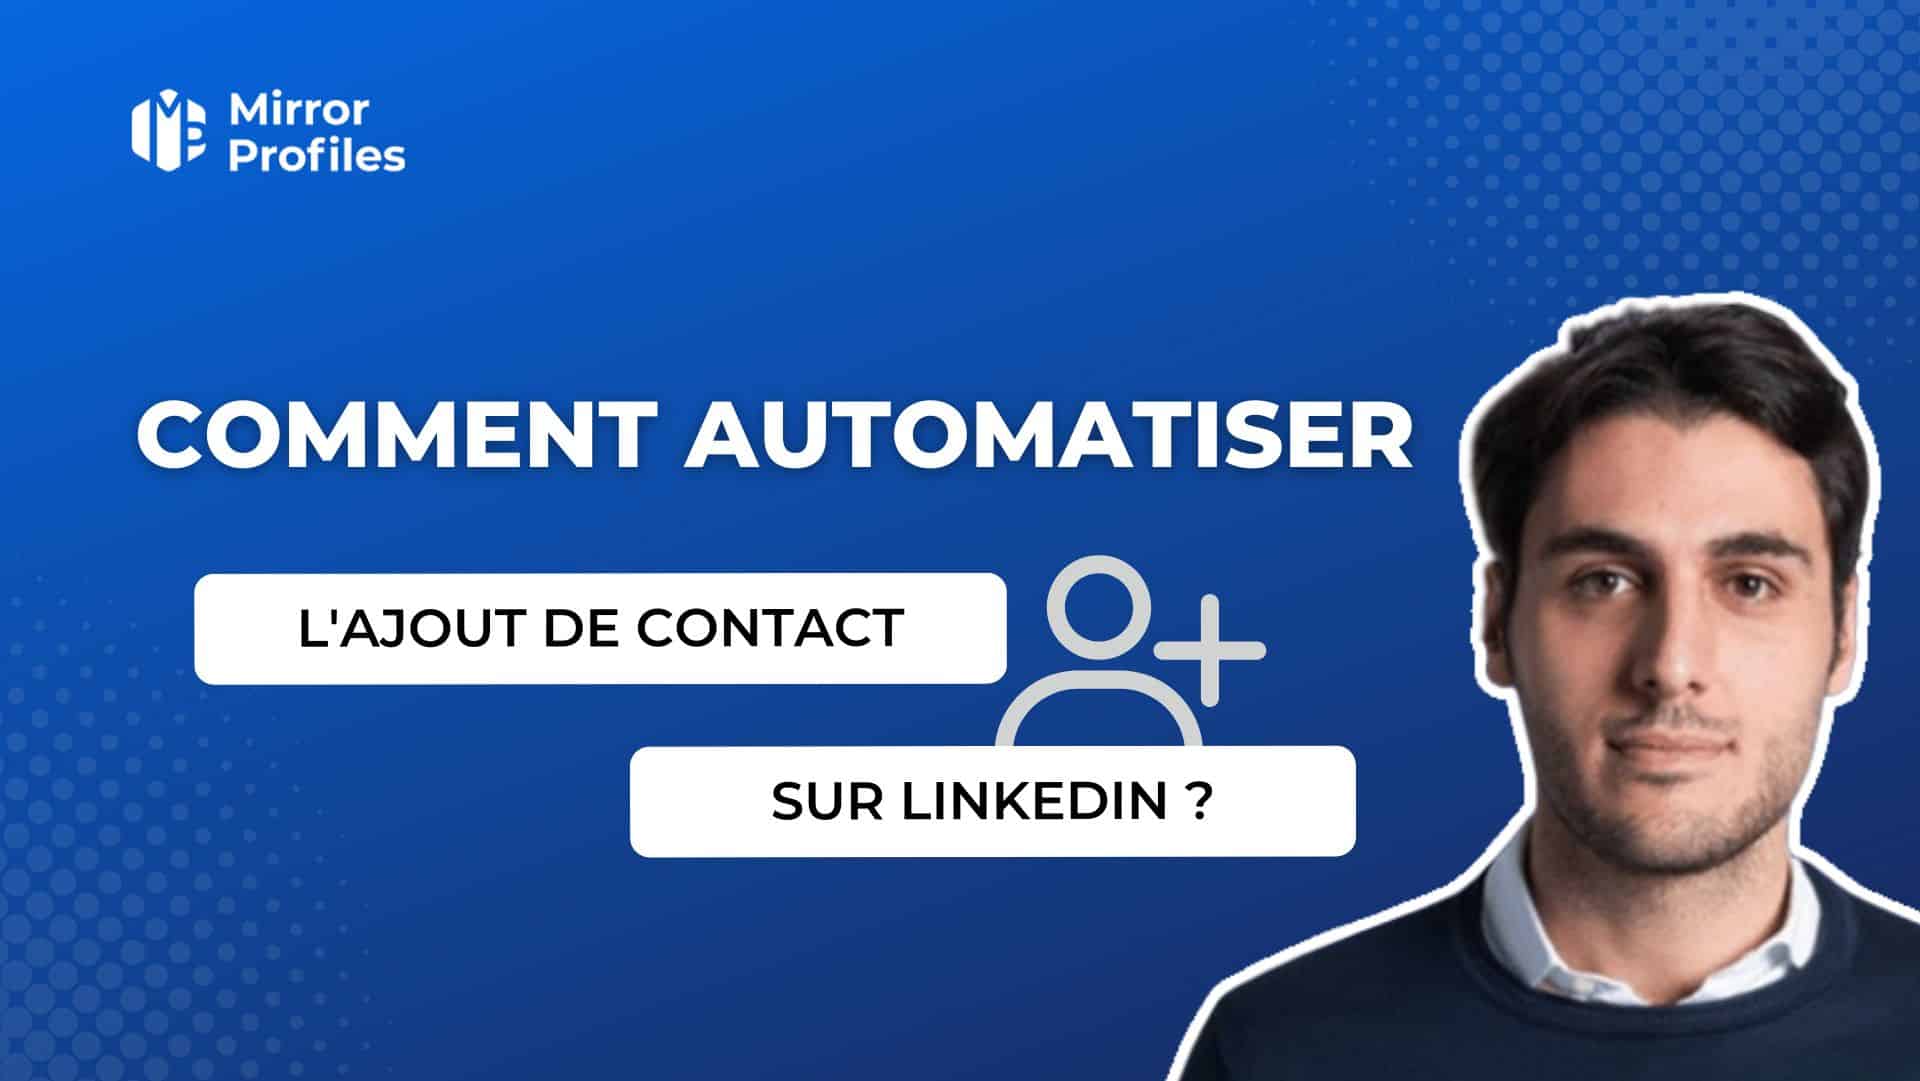 Advertisement for Mirror Profiles with text in French reading, "Comment Automatiser l'Ajout de Contact sur LinkedIn?" against a blue background with a man's photo on the right side, highlighting how to automate Linkedin contact addition effectively.